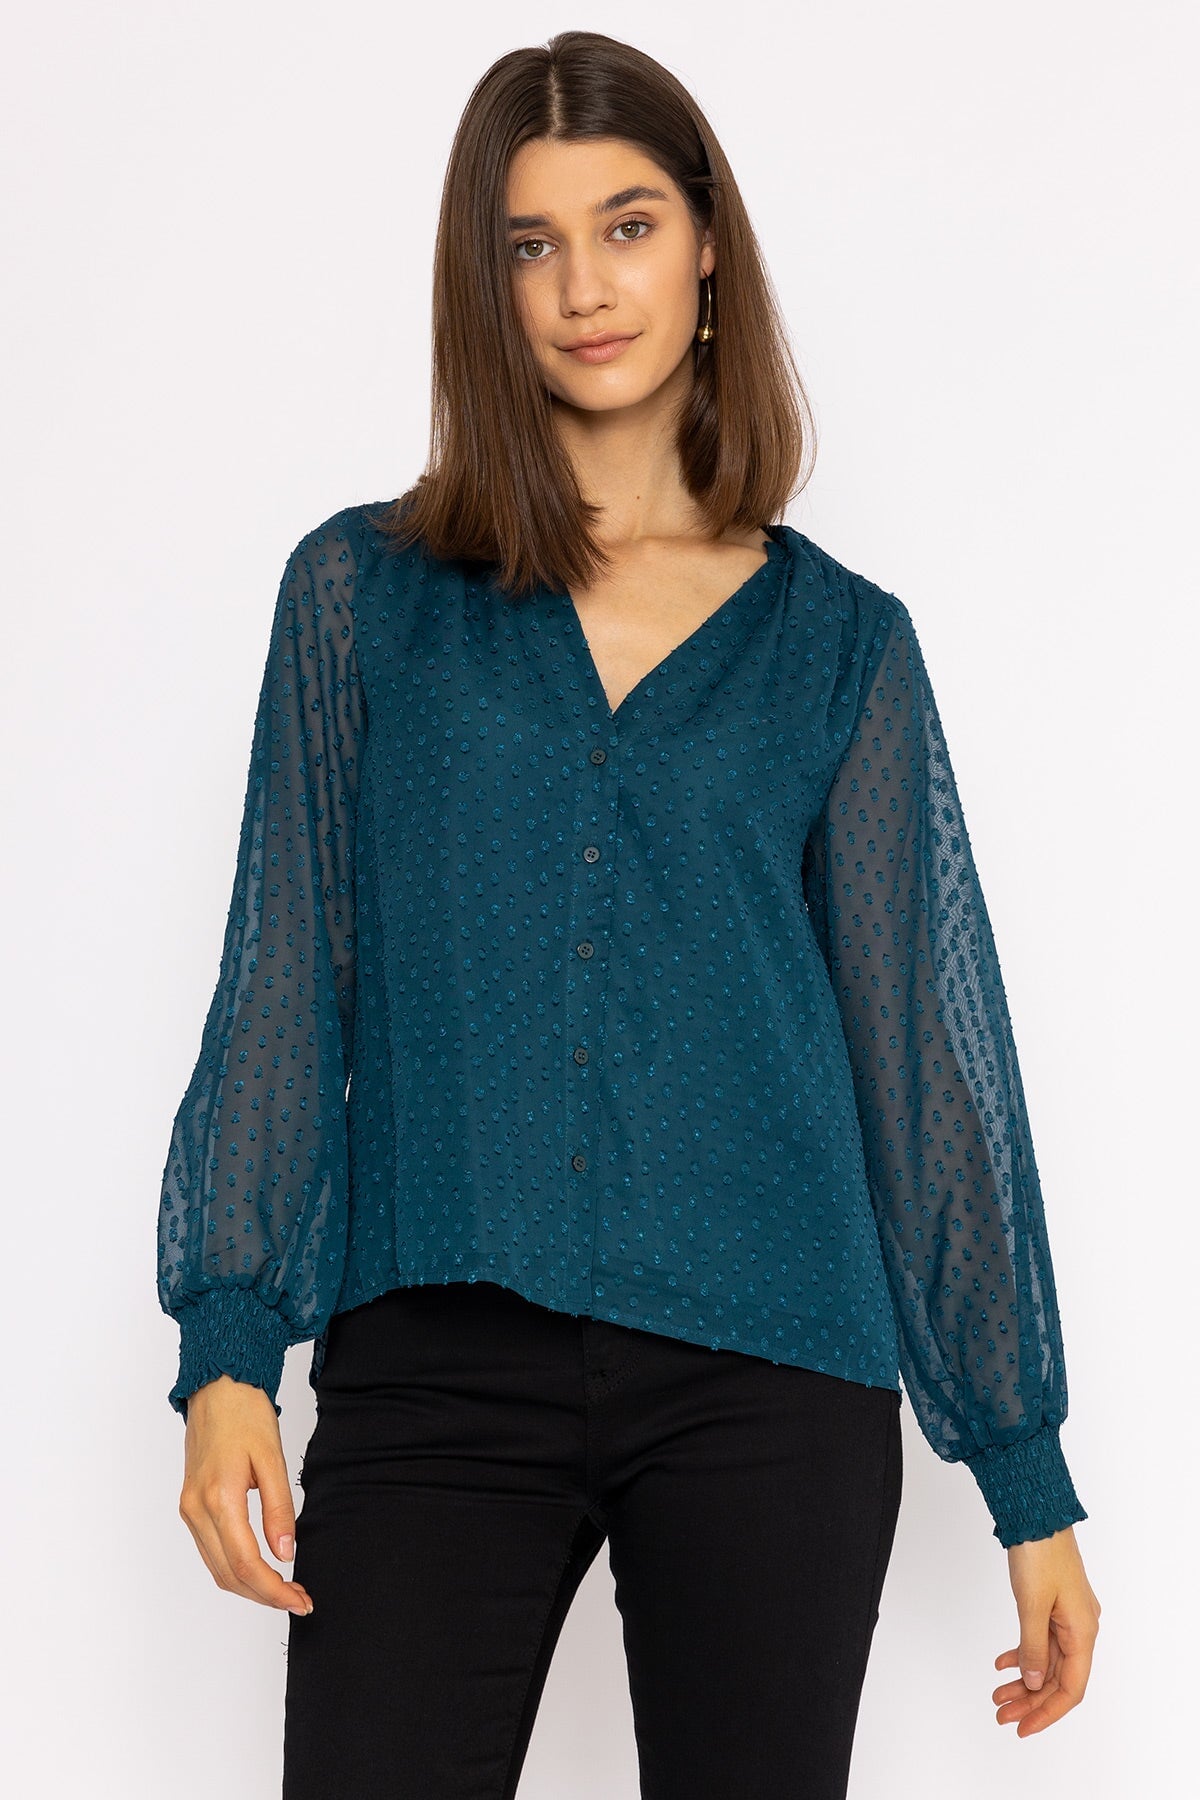 Dobby Texture Blouse in Teal - Top in Teal | Carraig Donn